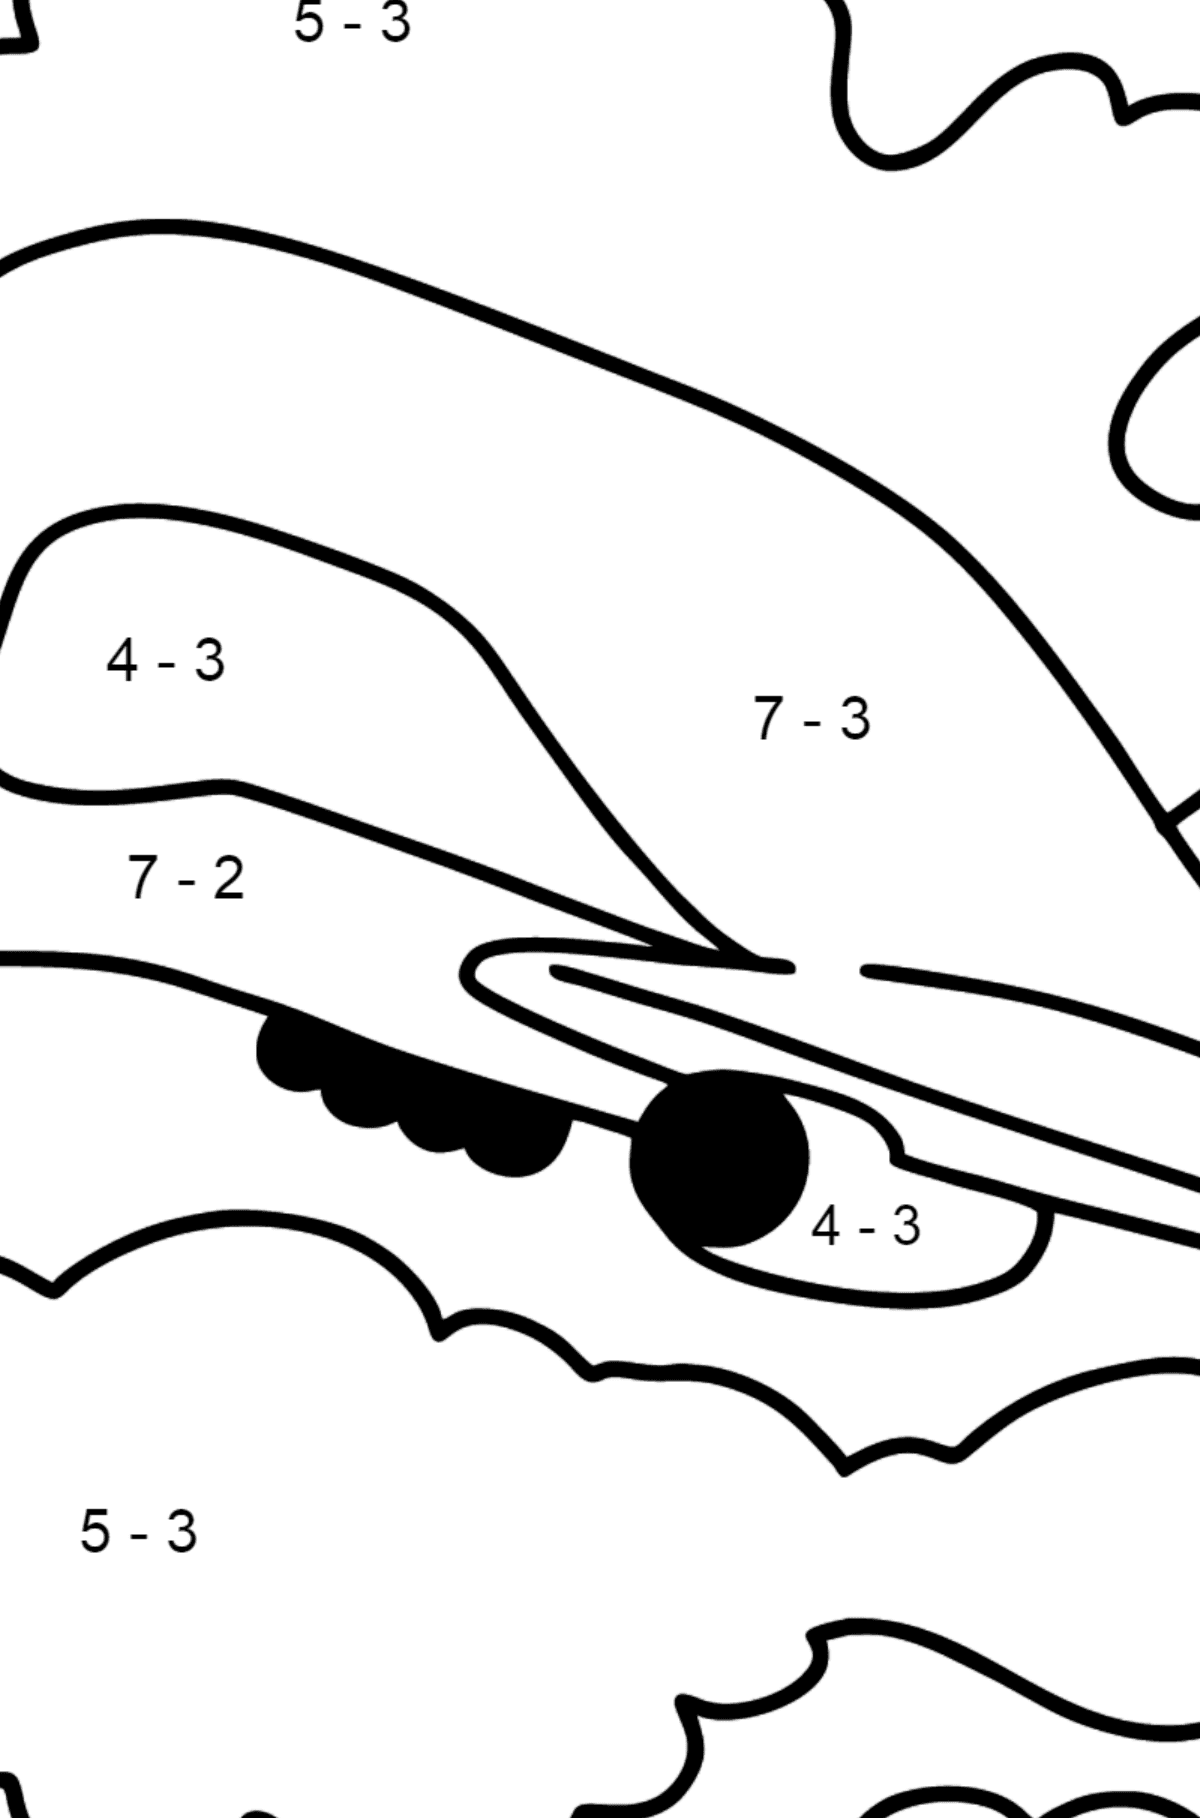 Cargo Plane coloring page - Math Coloring - Subtraction for Kids